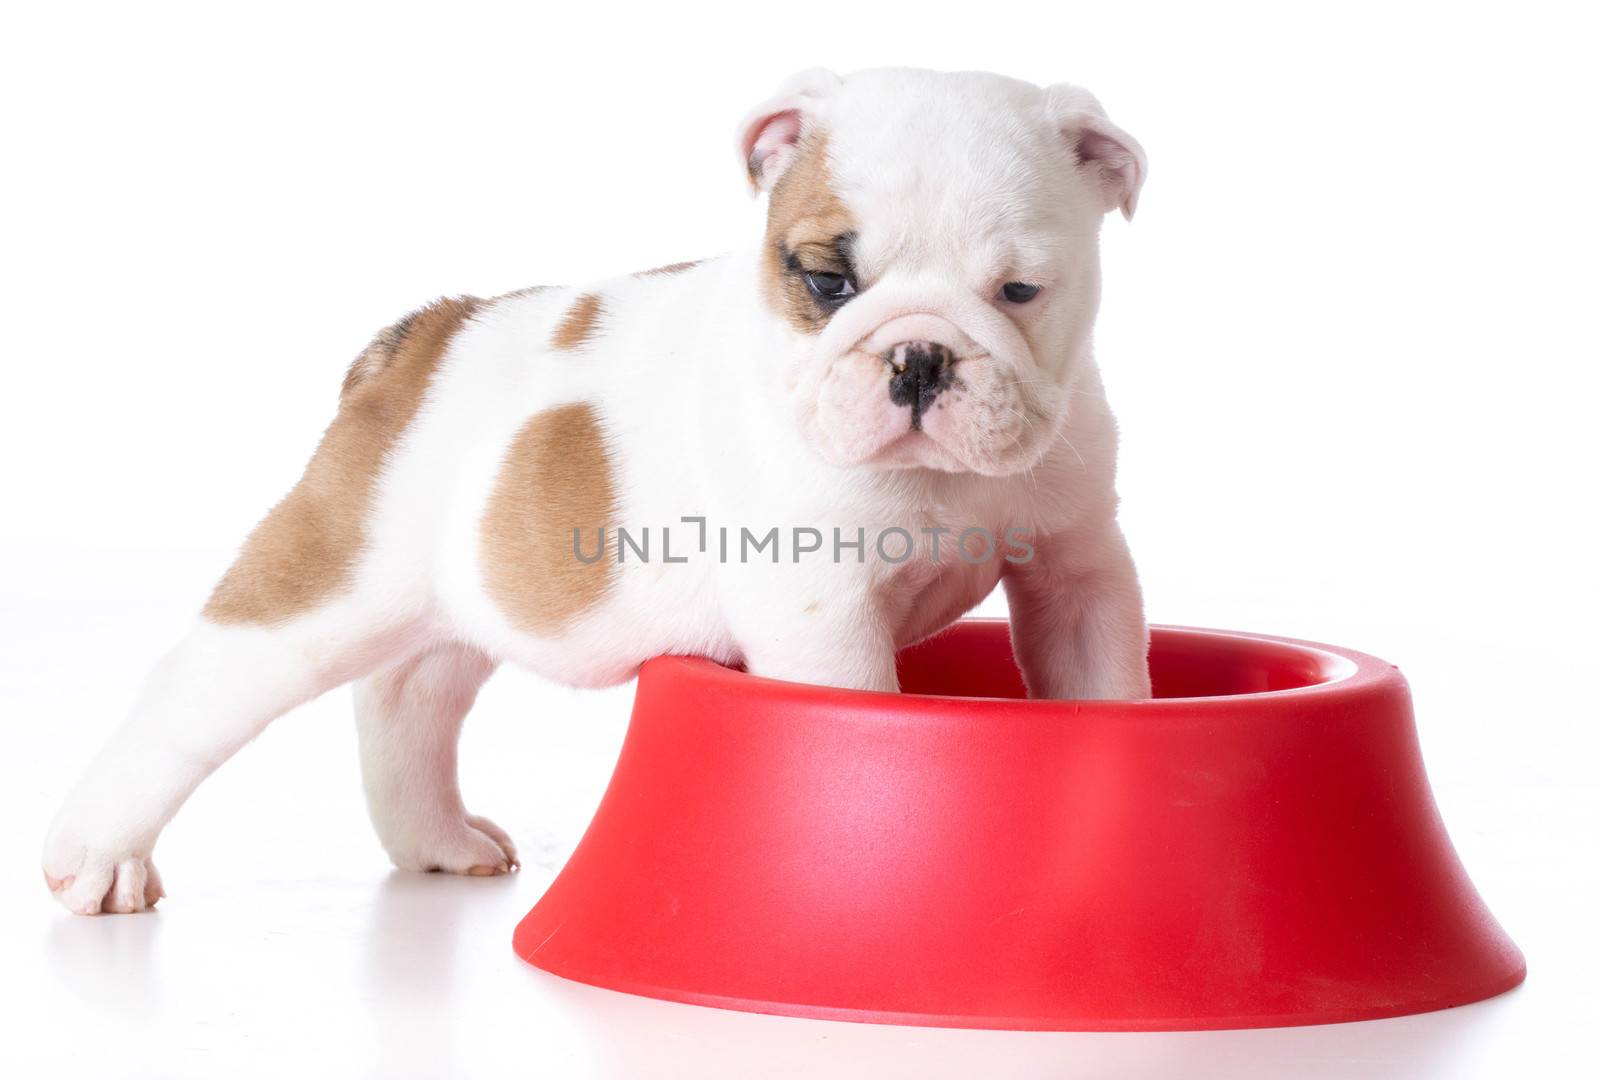 hungry puppy - bulldog puppy with front feet inside large dog bowl on white background